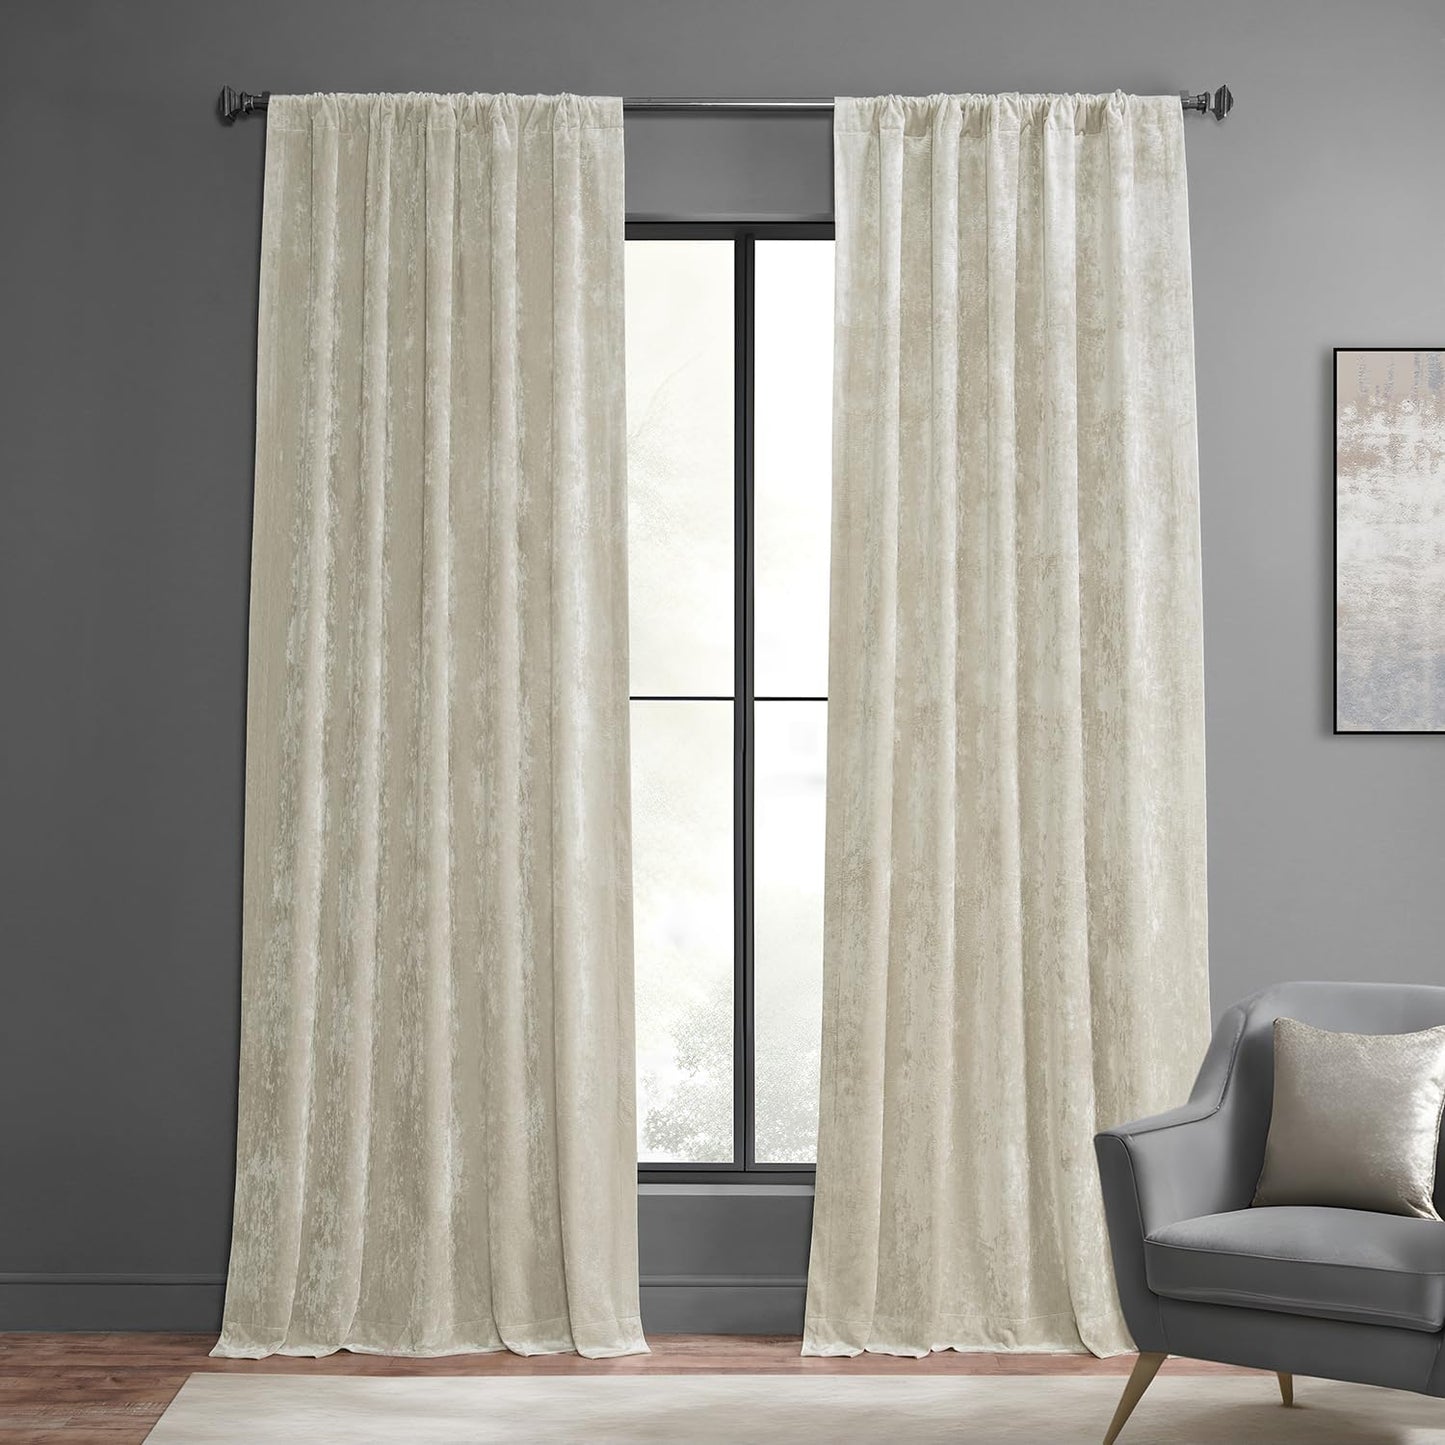 HPD Half Price Drapes Lush Crush Velvet Curtains - Room Darkening Curtain 96 Inches Long for Bedroom & Living Room, Luxury Look, Rod Pocket Design, (1 Panel), 50W X 96L, Taupe  Exclusive Fabrics & Furnishings Champagne 50W X 108L 